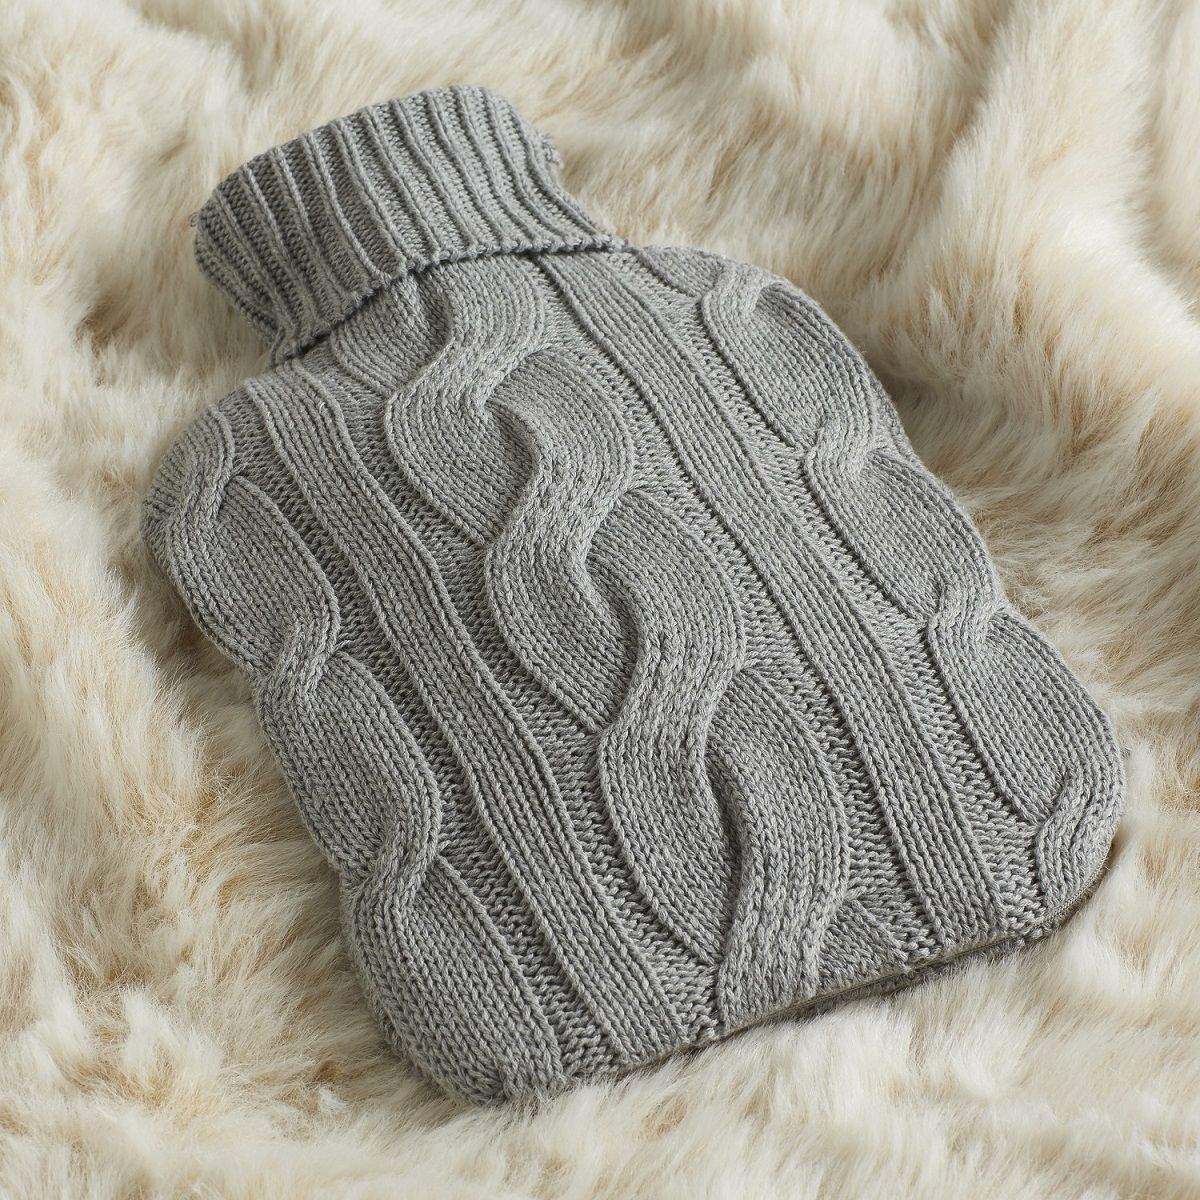 100% Cotton Cable Knitted Hot Water Bottle Cover for Pain Relief Ease Aches Cold Hot Therapy Bed and Bath Linen